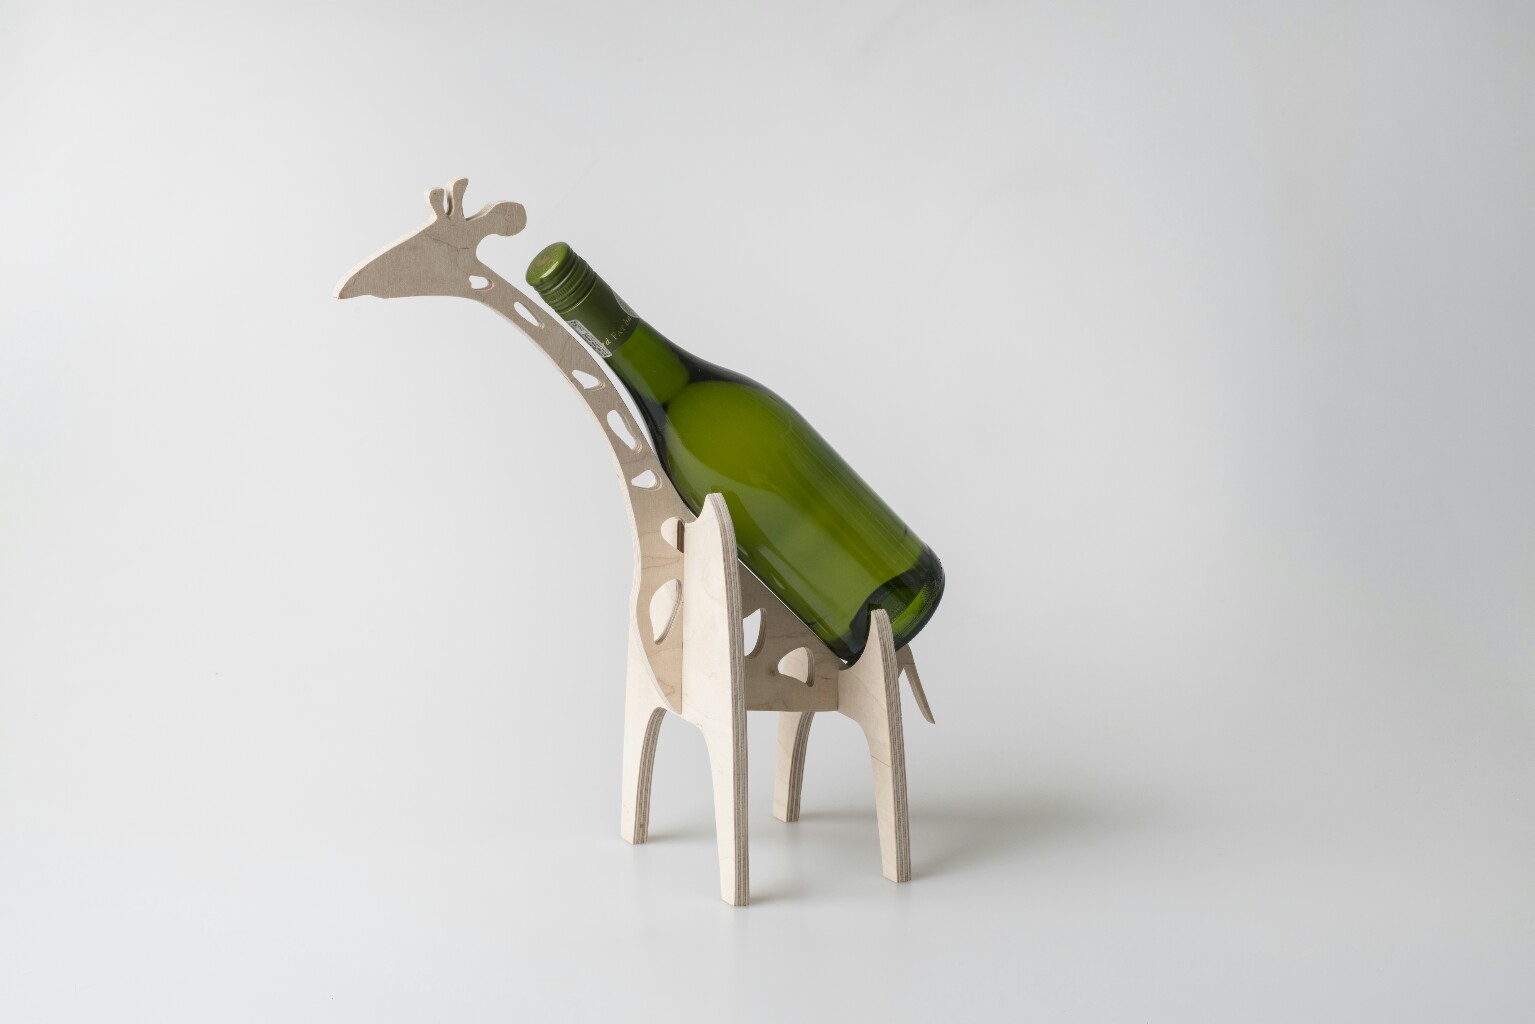 Wooden Giraffe Wine Bottle stand made by Native Decor South Africa